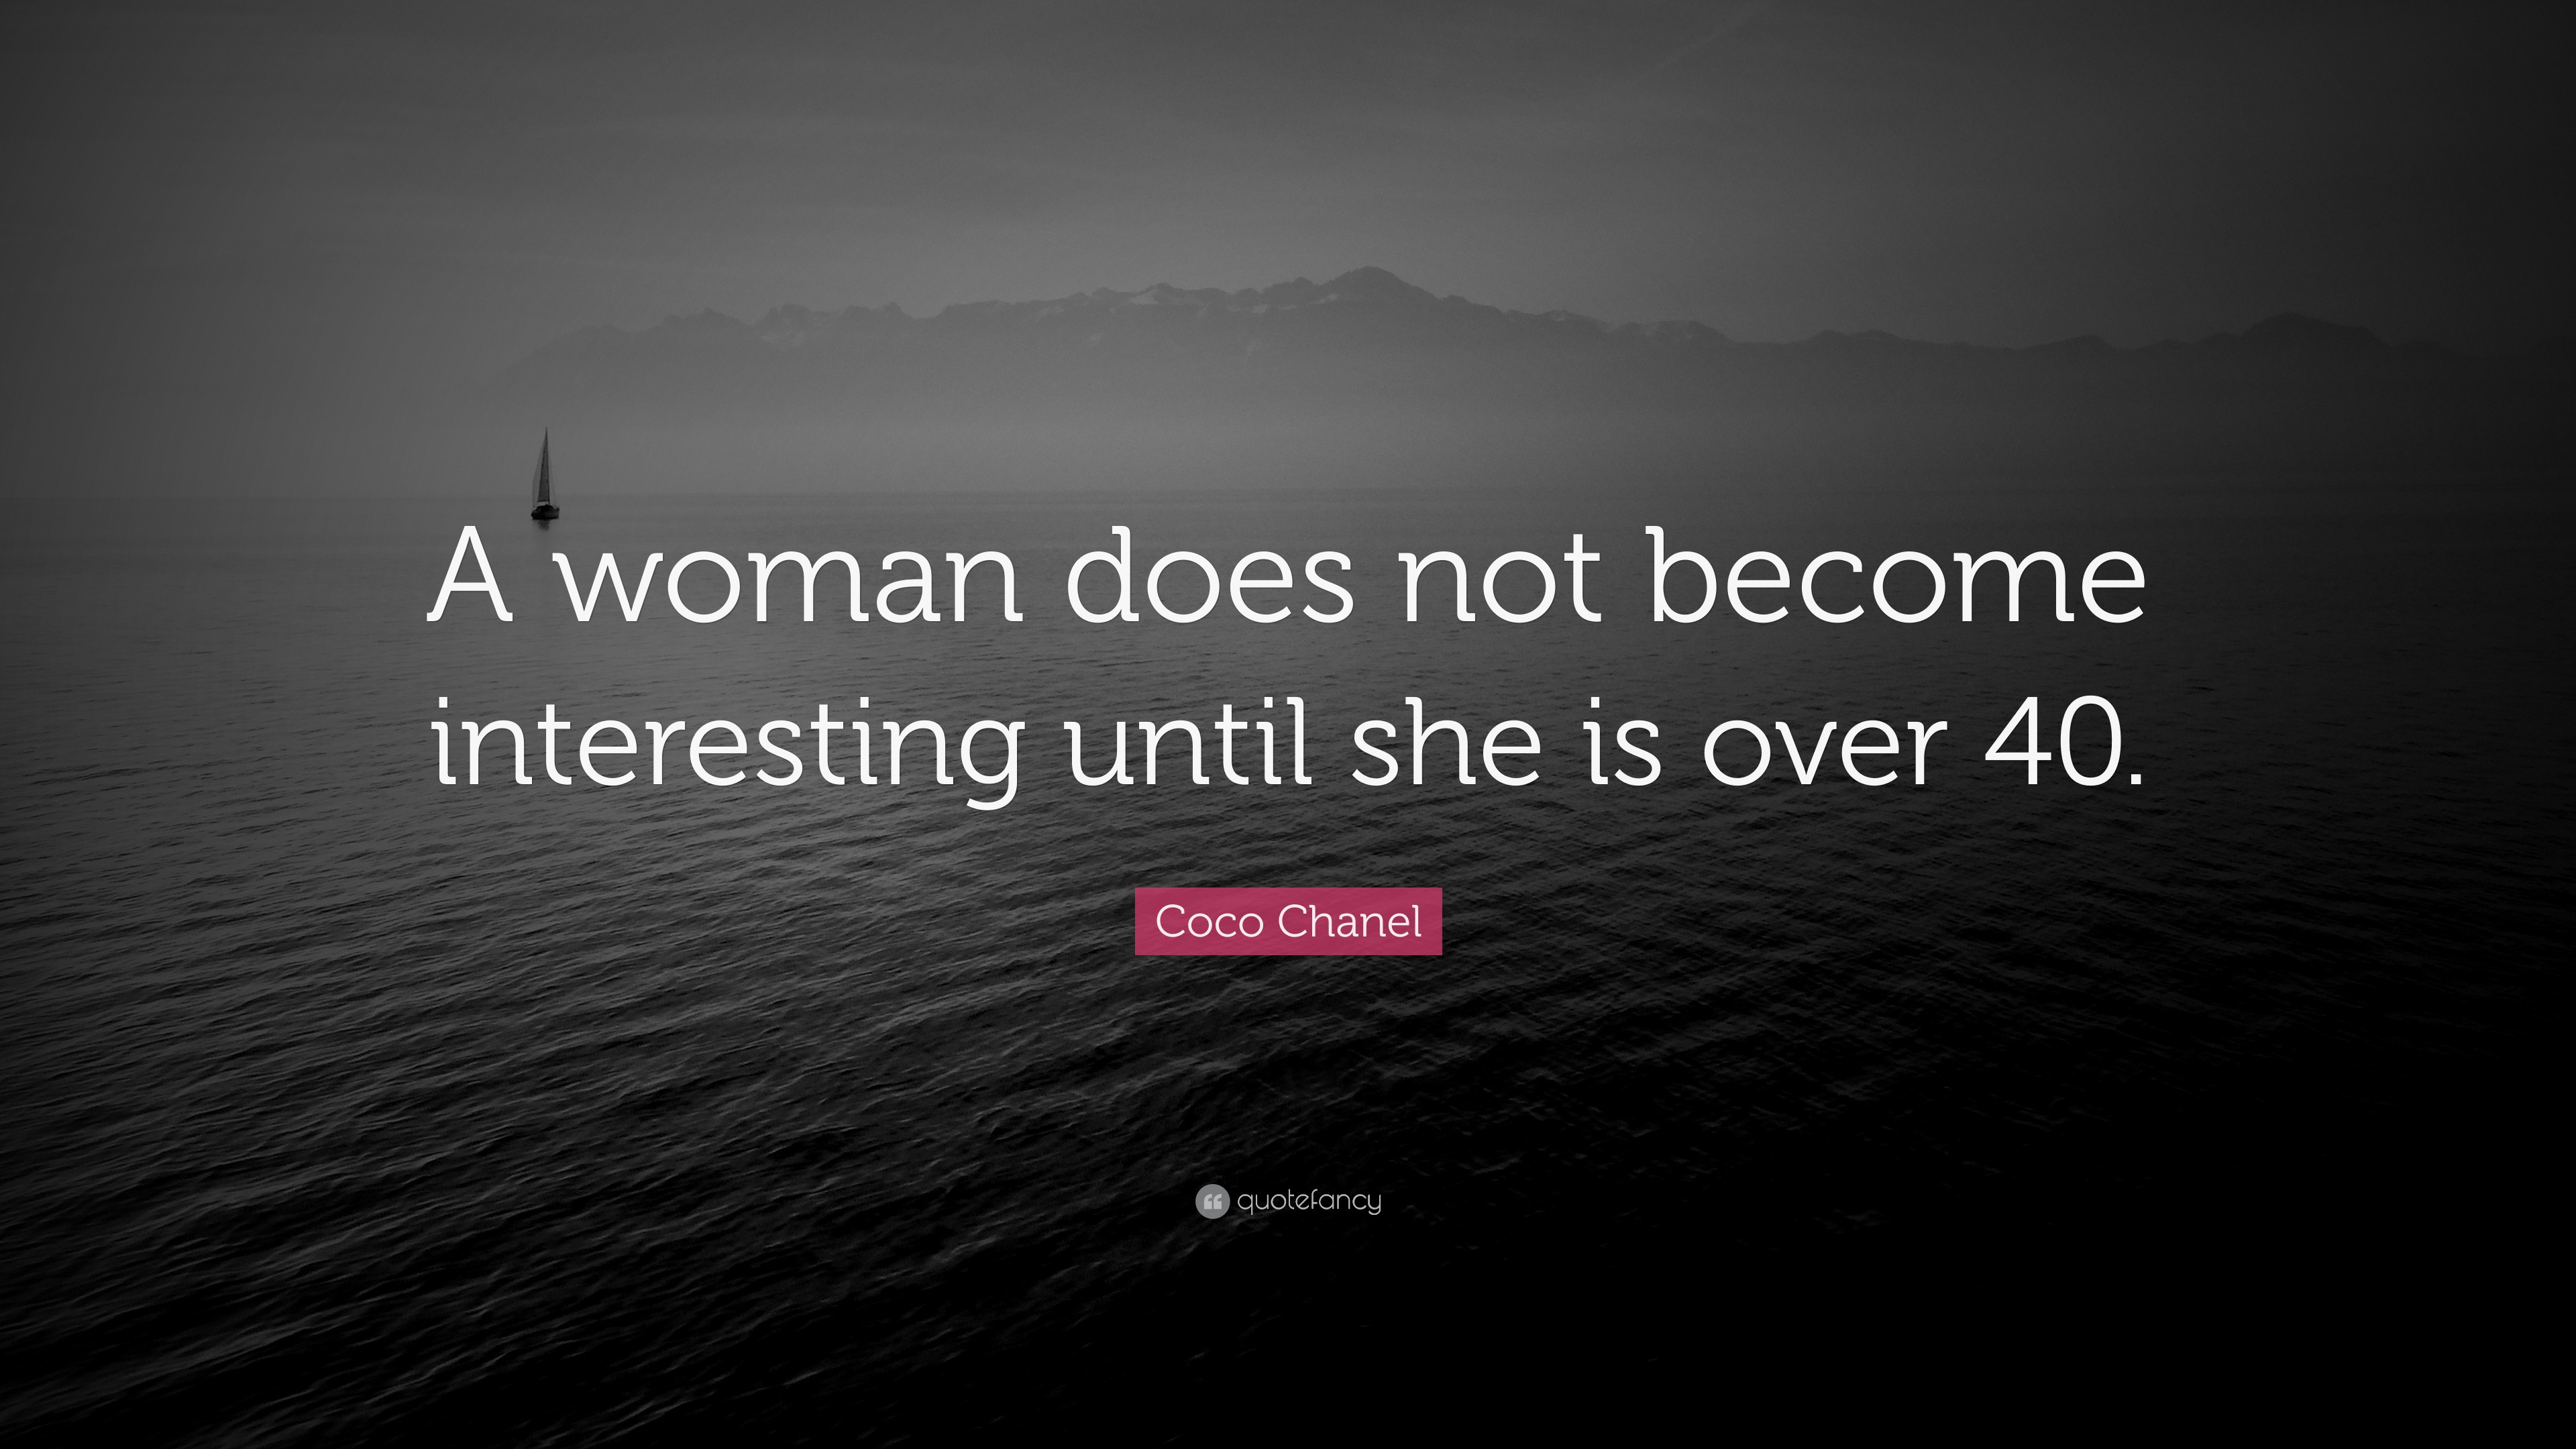 Coco Chanel Quote: “A woman does not become interesting until she is over 40 .”